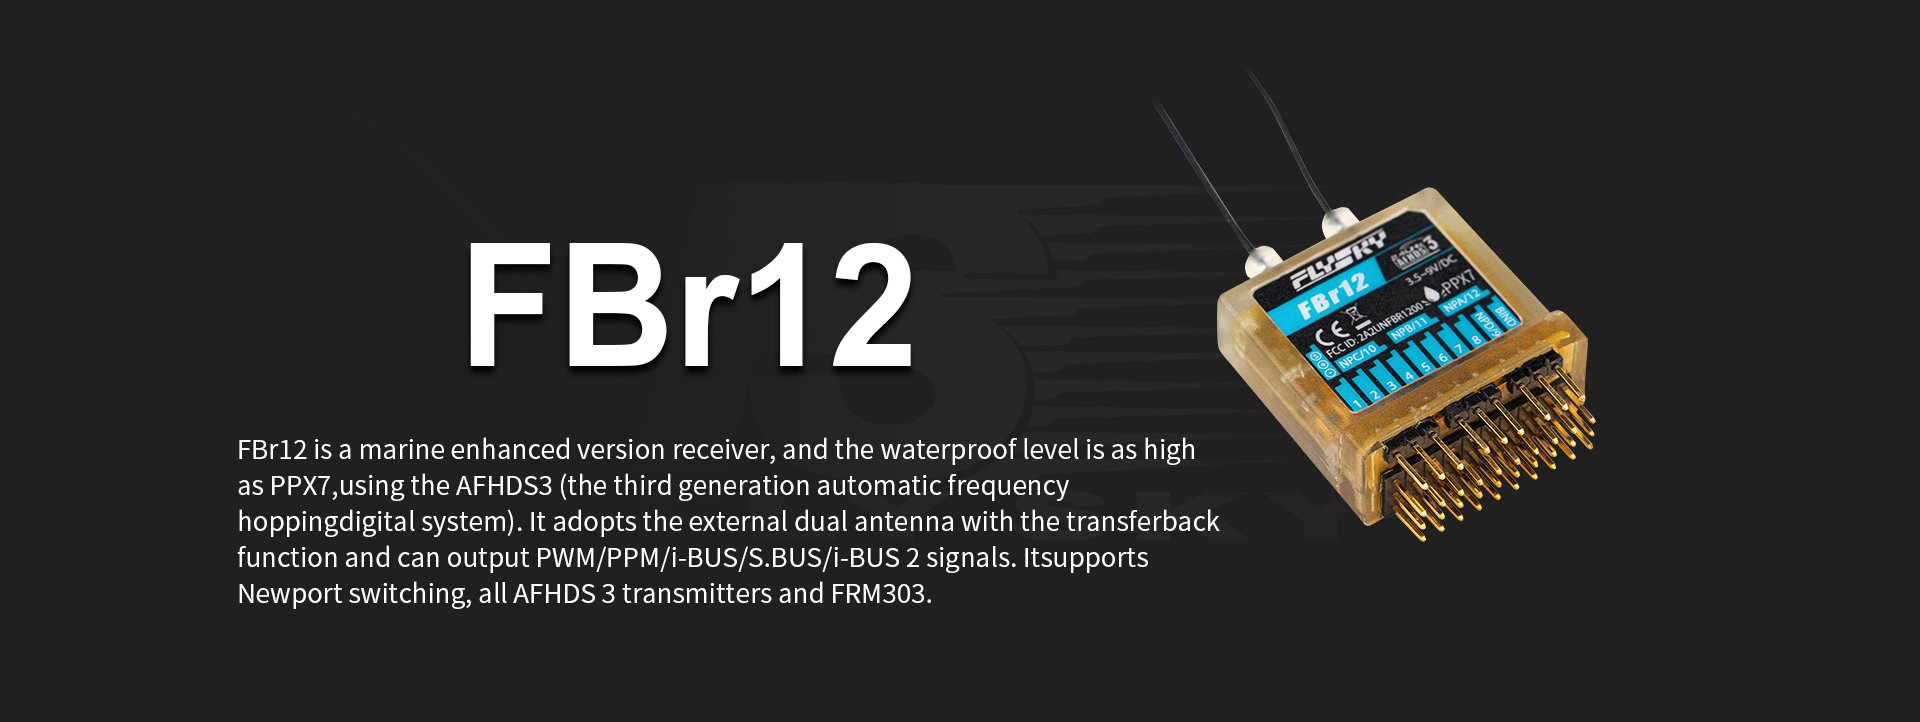 FlySky FBr12 Receiver, FBrl2 is a marine enhanced version receiver, and the waterproof level is as